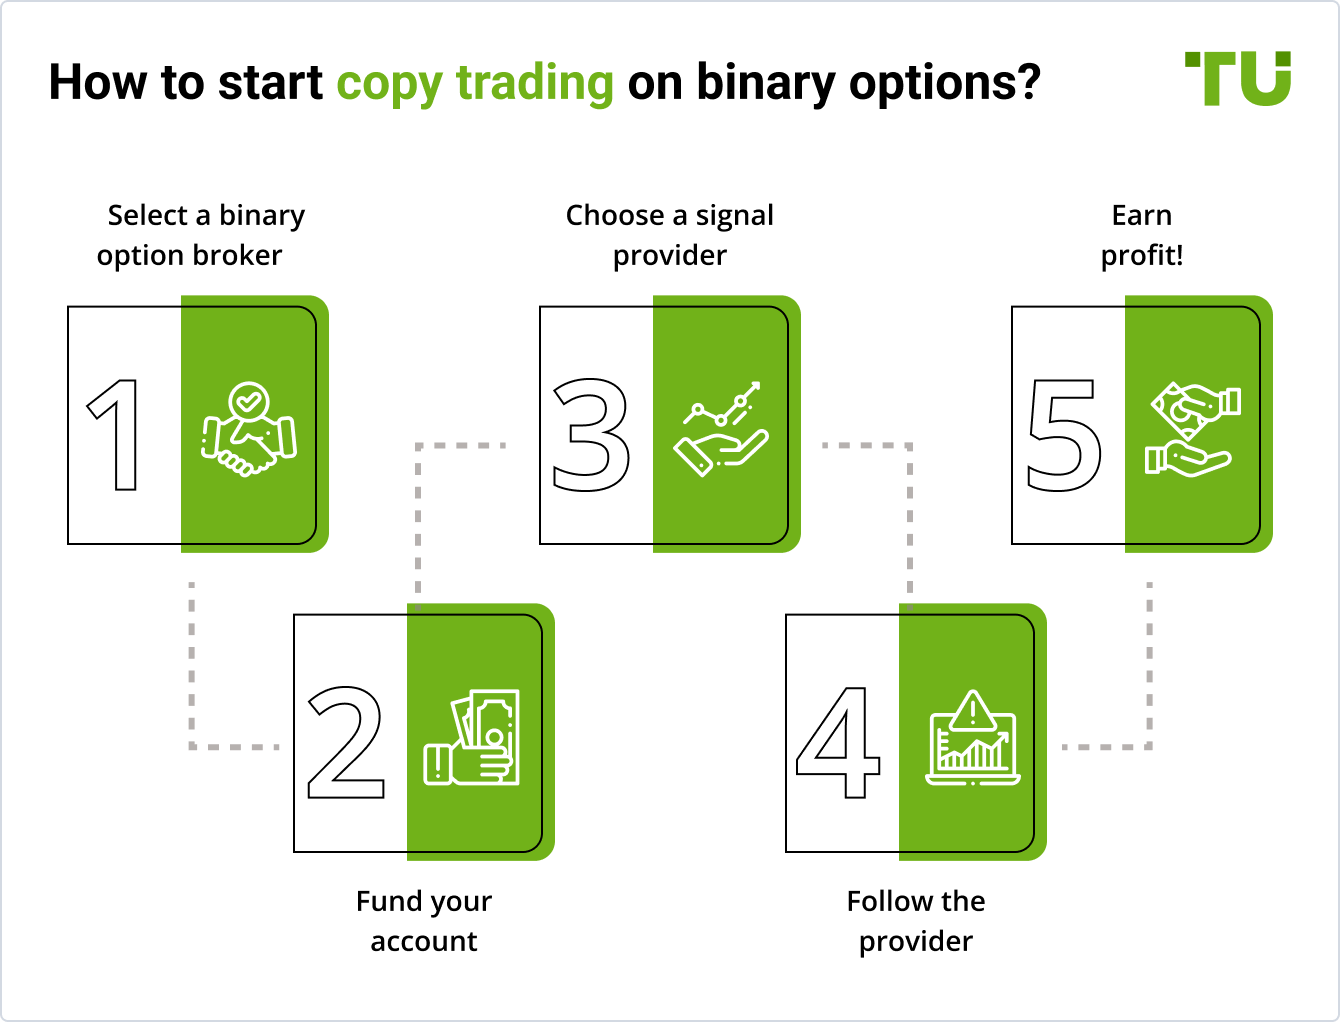 Binary options with copying trades forex first steps video